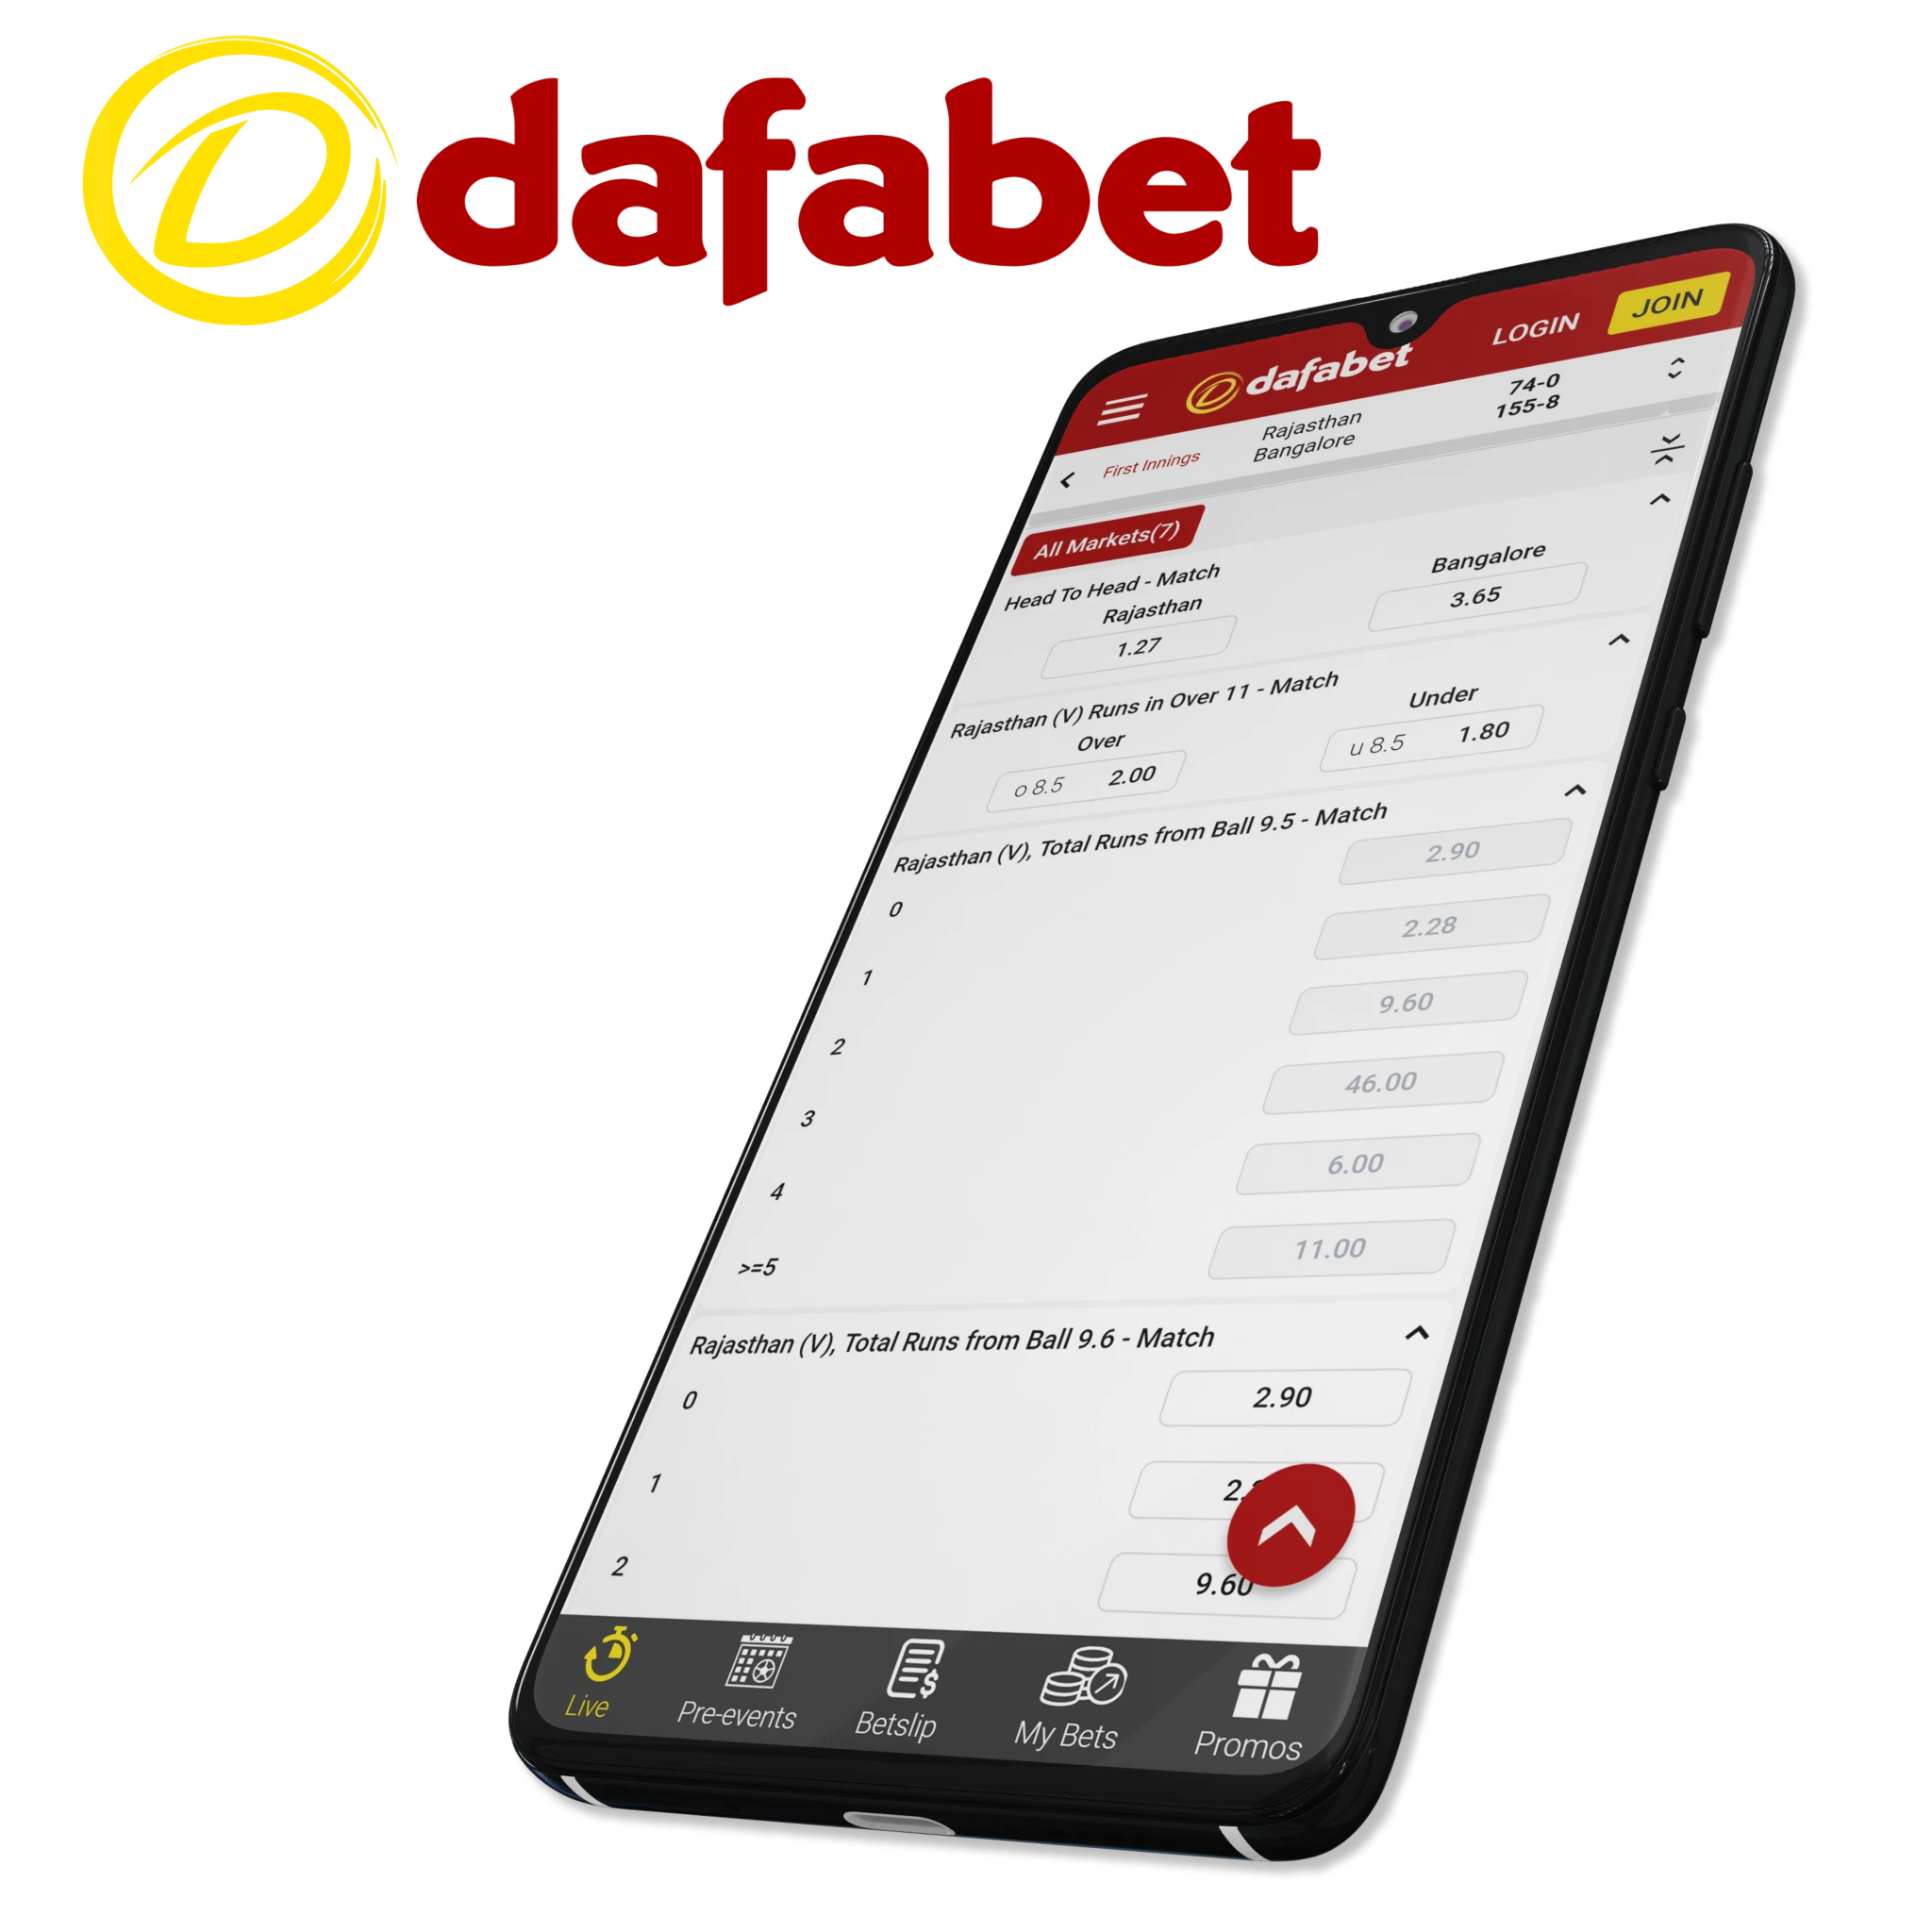 Dafabet app is very convenient to place IPL bets.